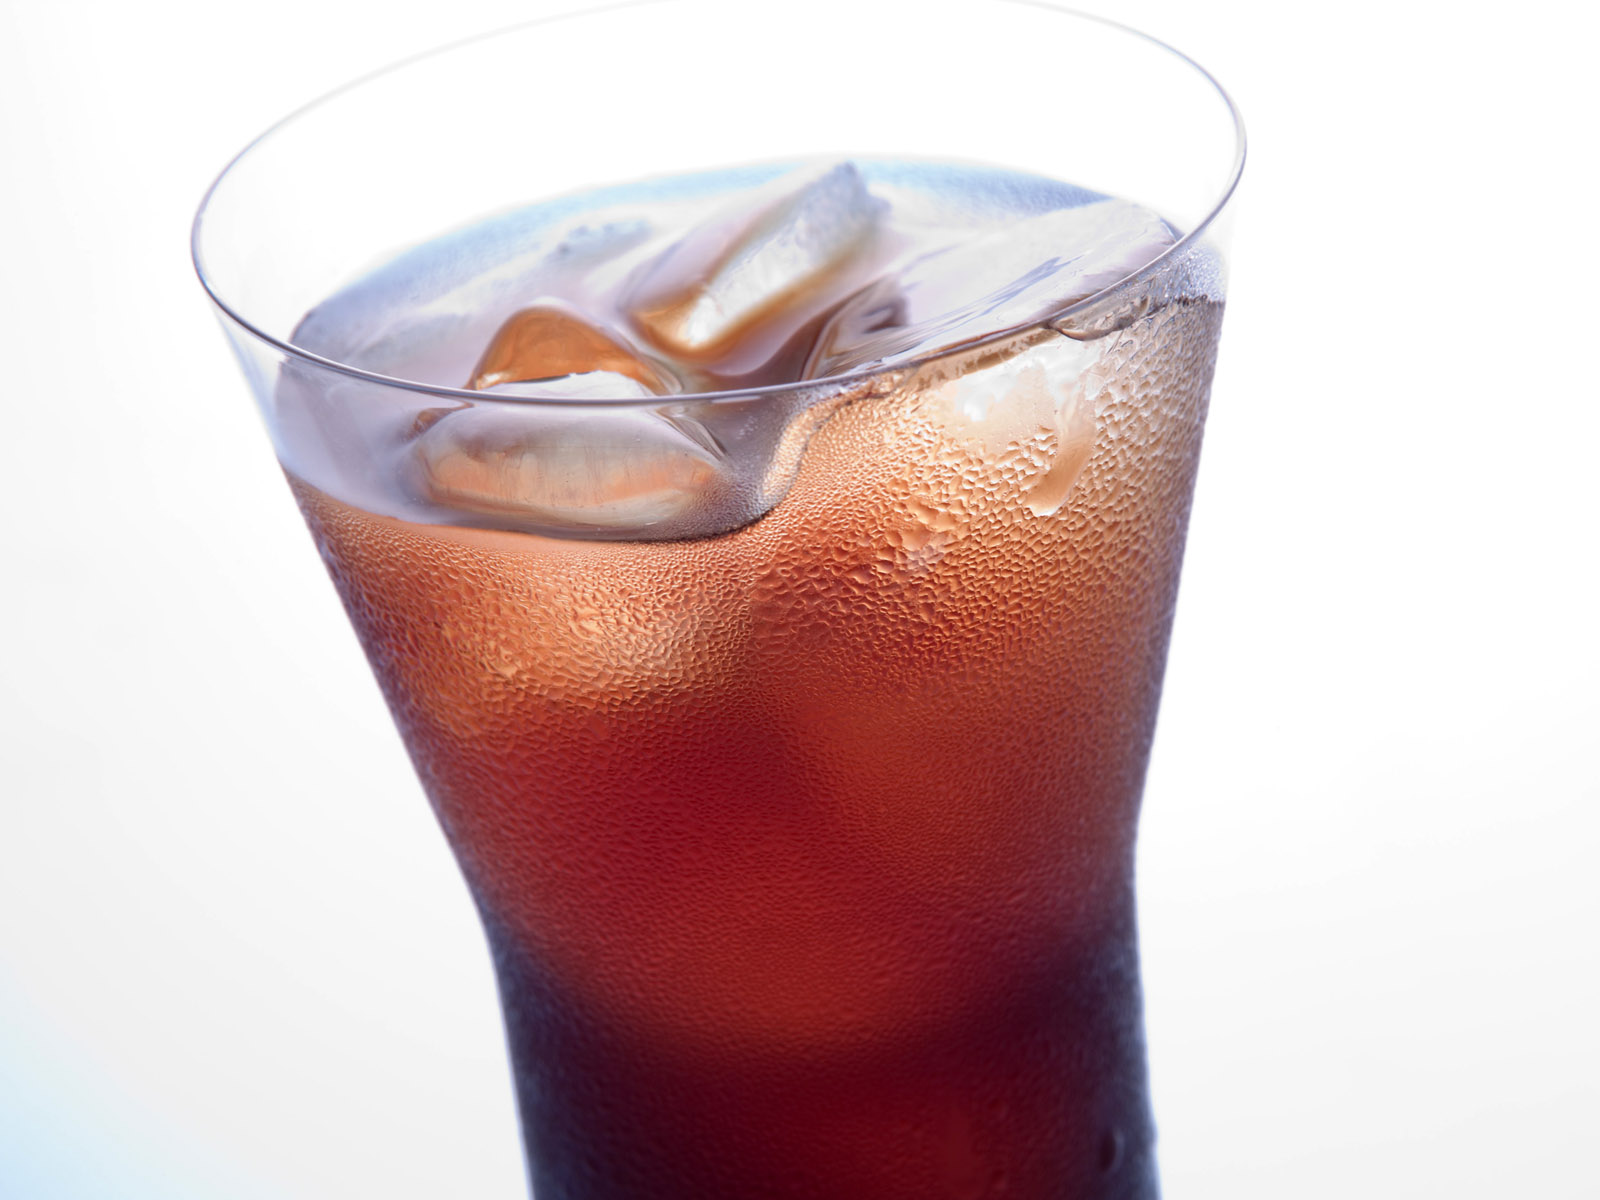 Summer Cold Drinks - Cold Coke - HD Wallpaper 